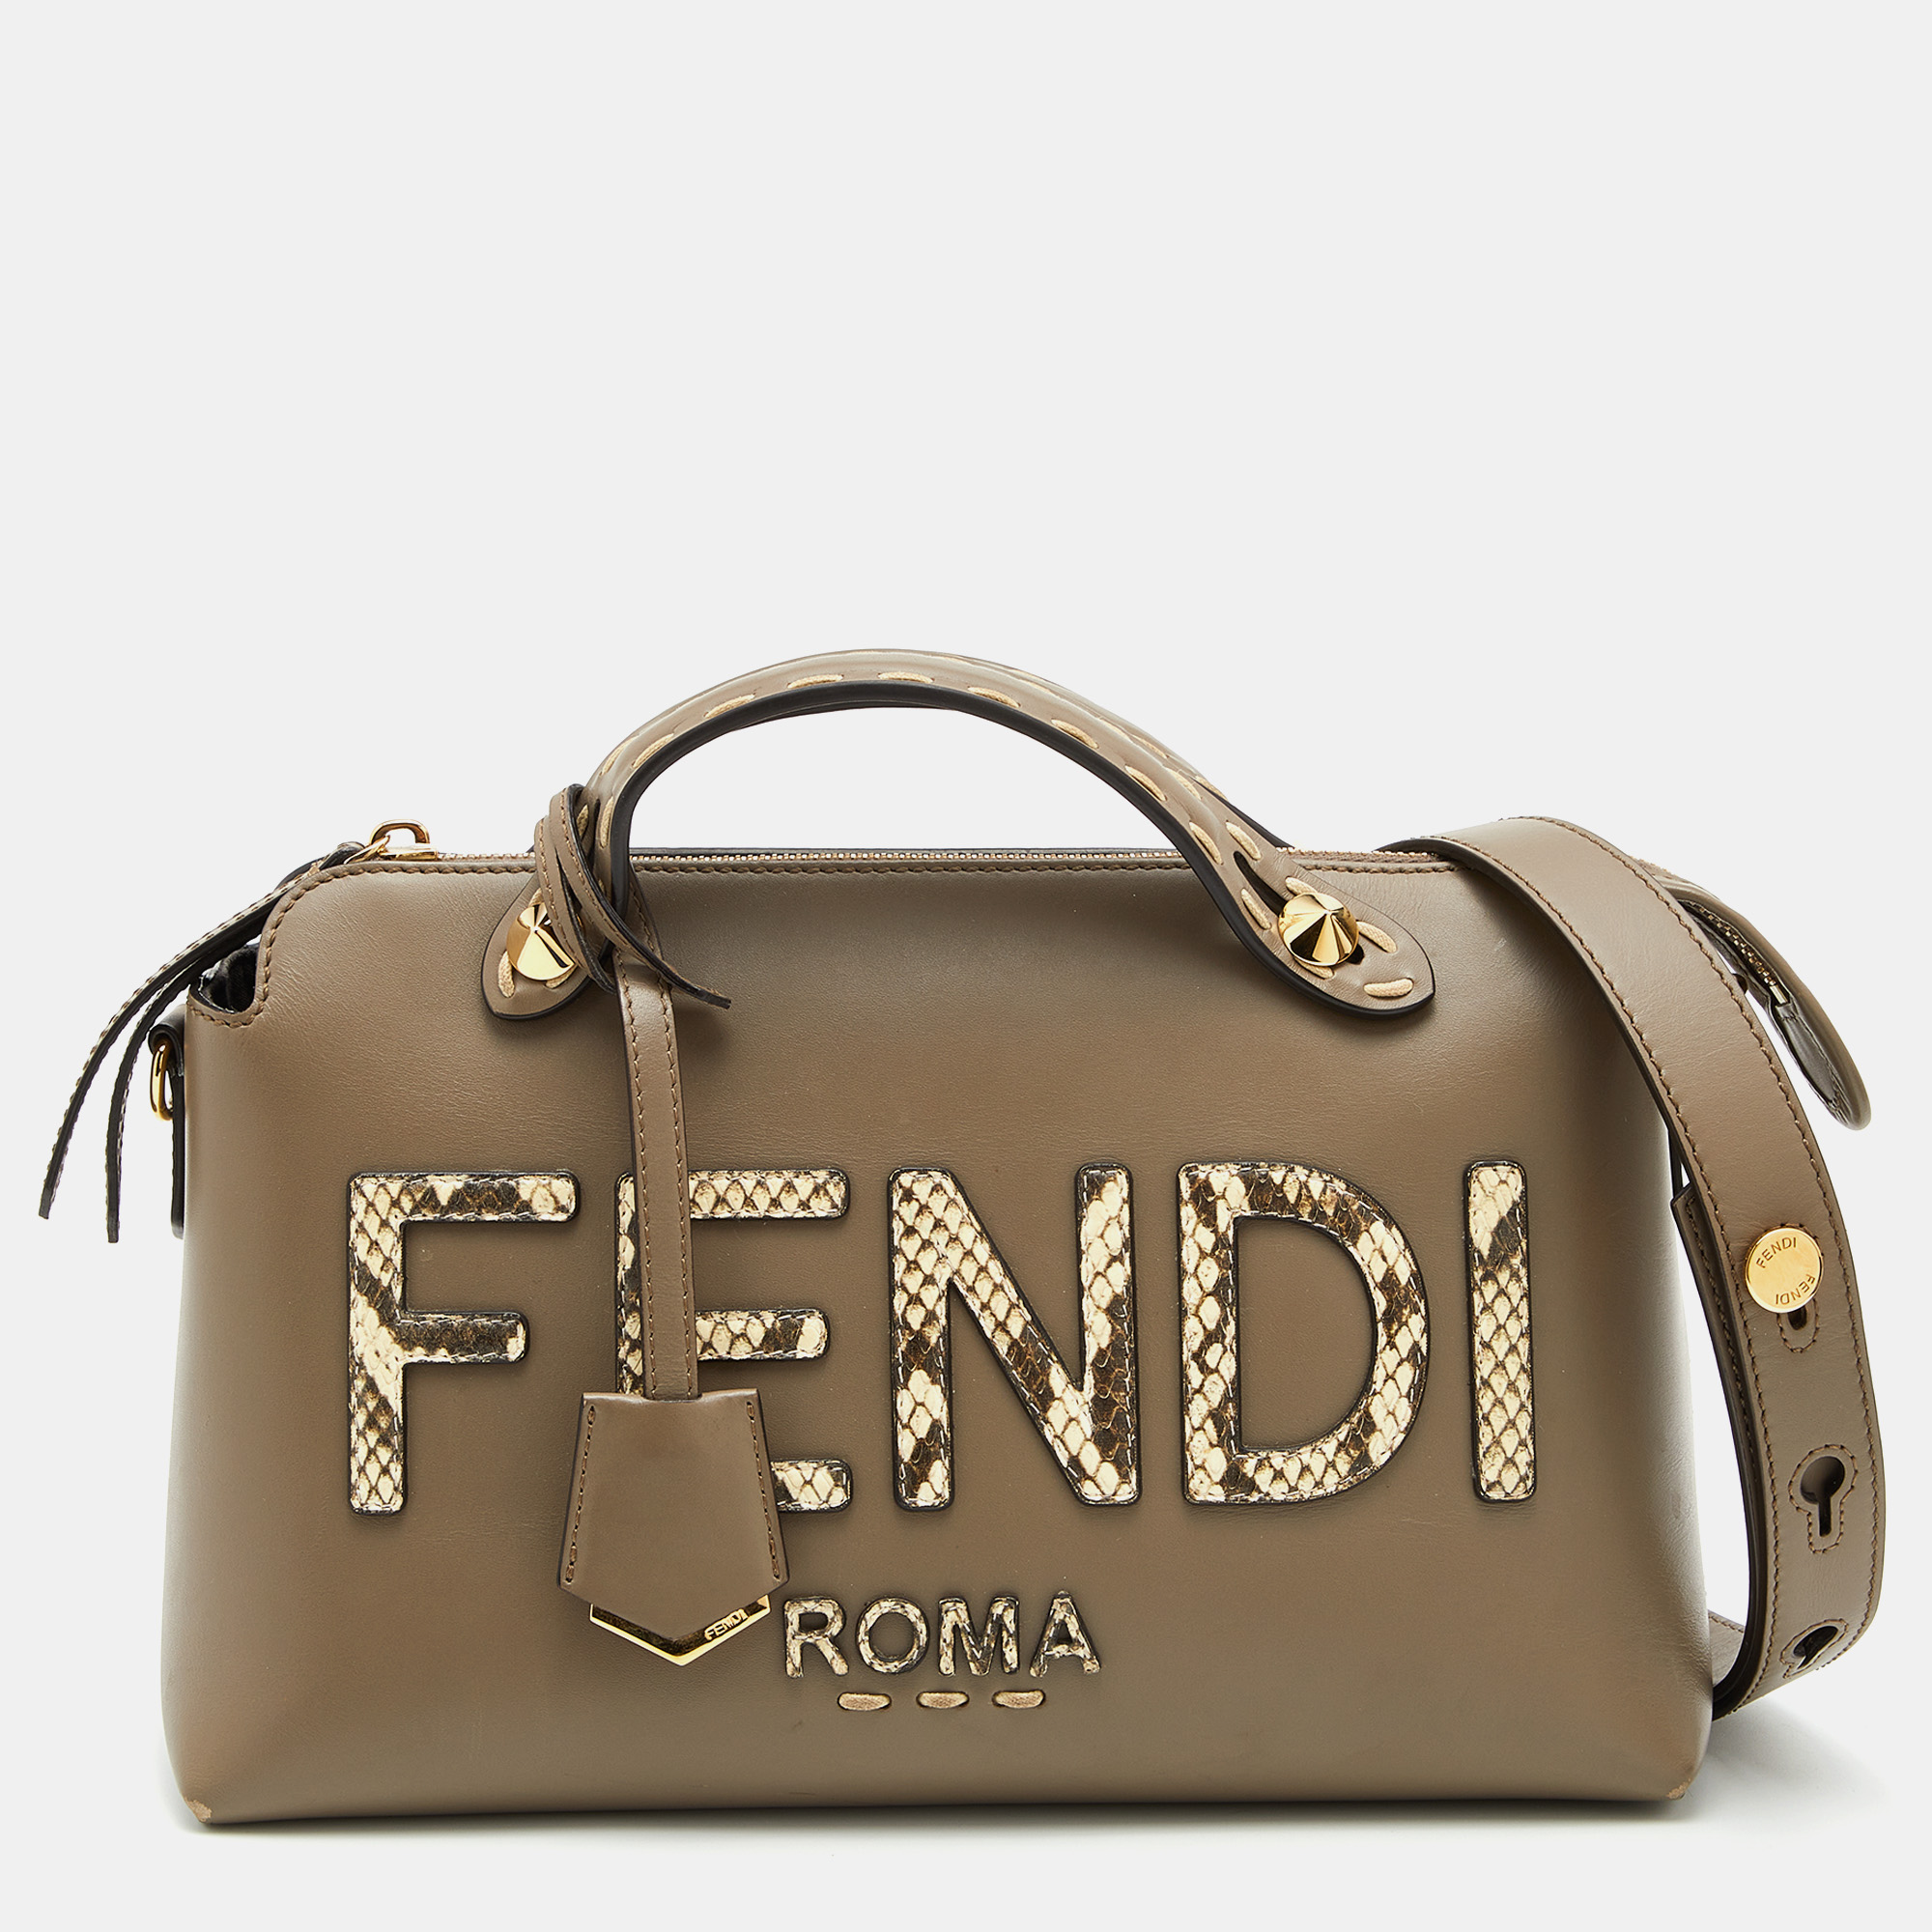 13 Fendi Bags That Are Somehow Under $200